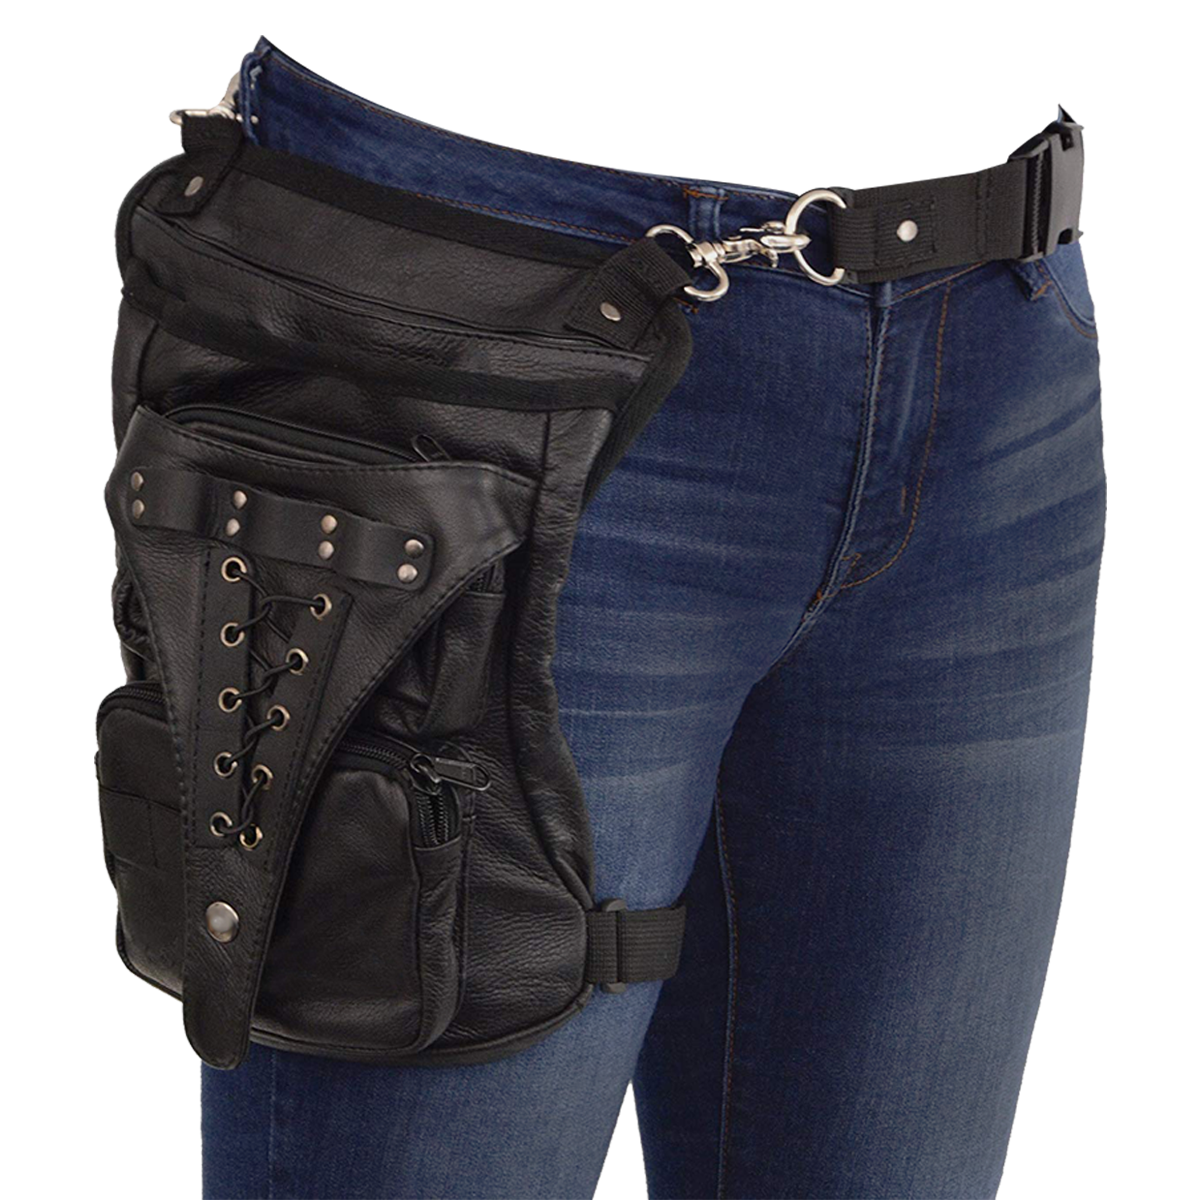 Vance Black Carry Leather Thigh Bag with Waist Belt